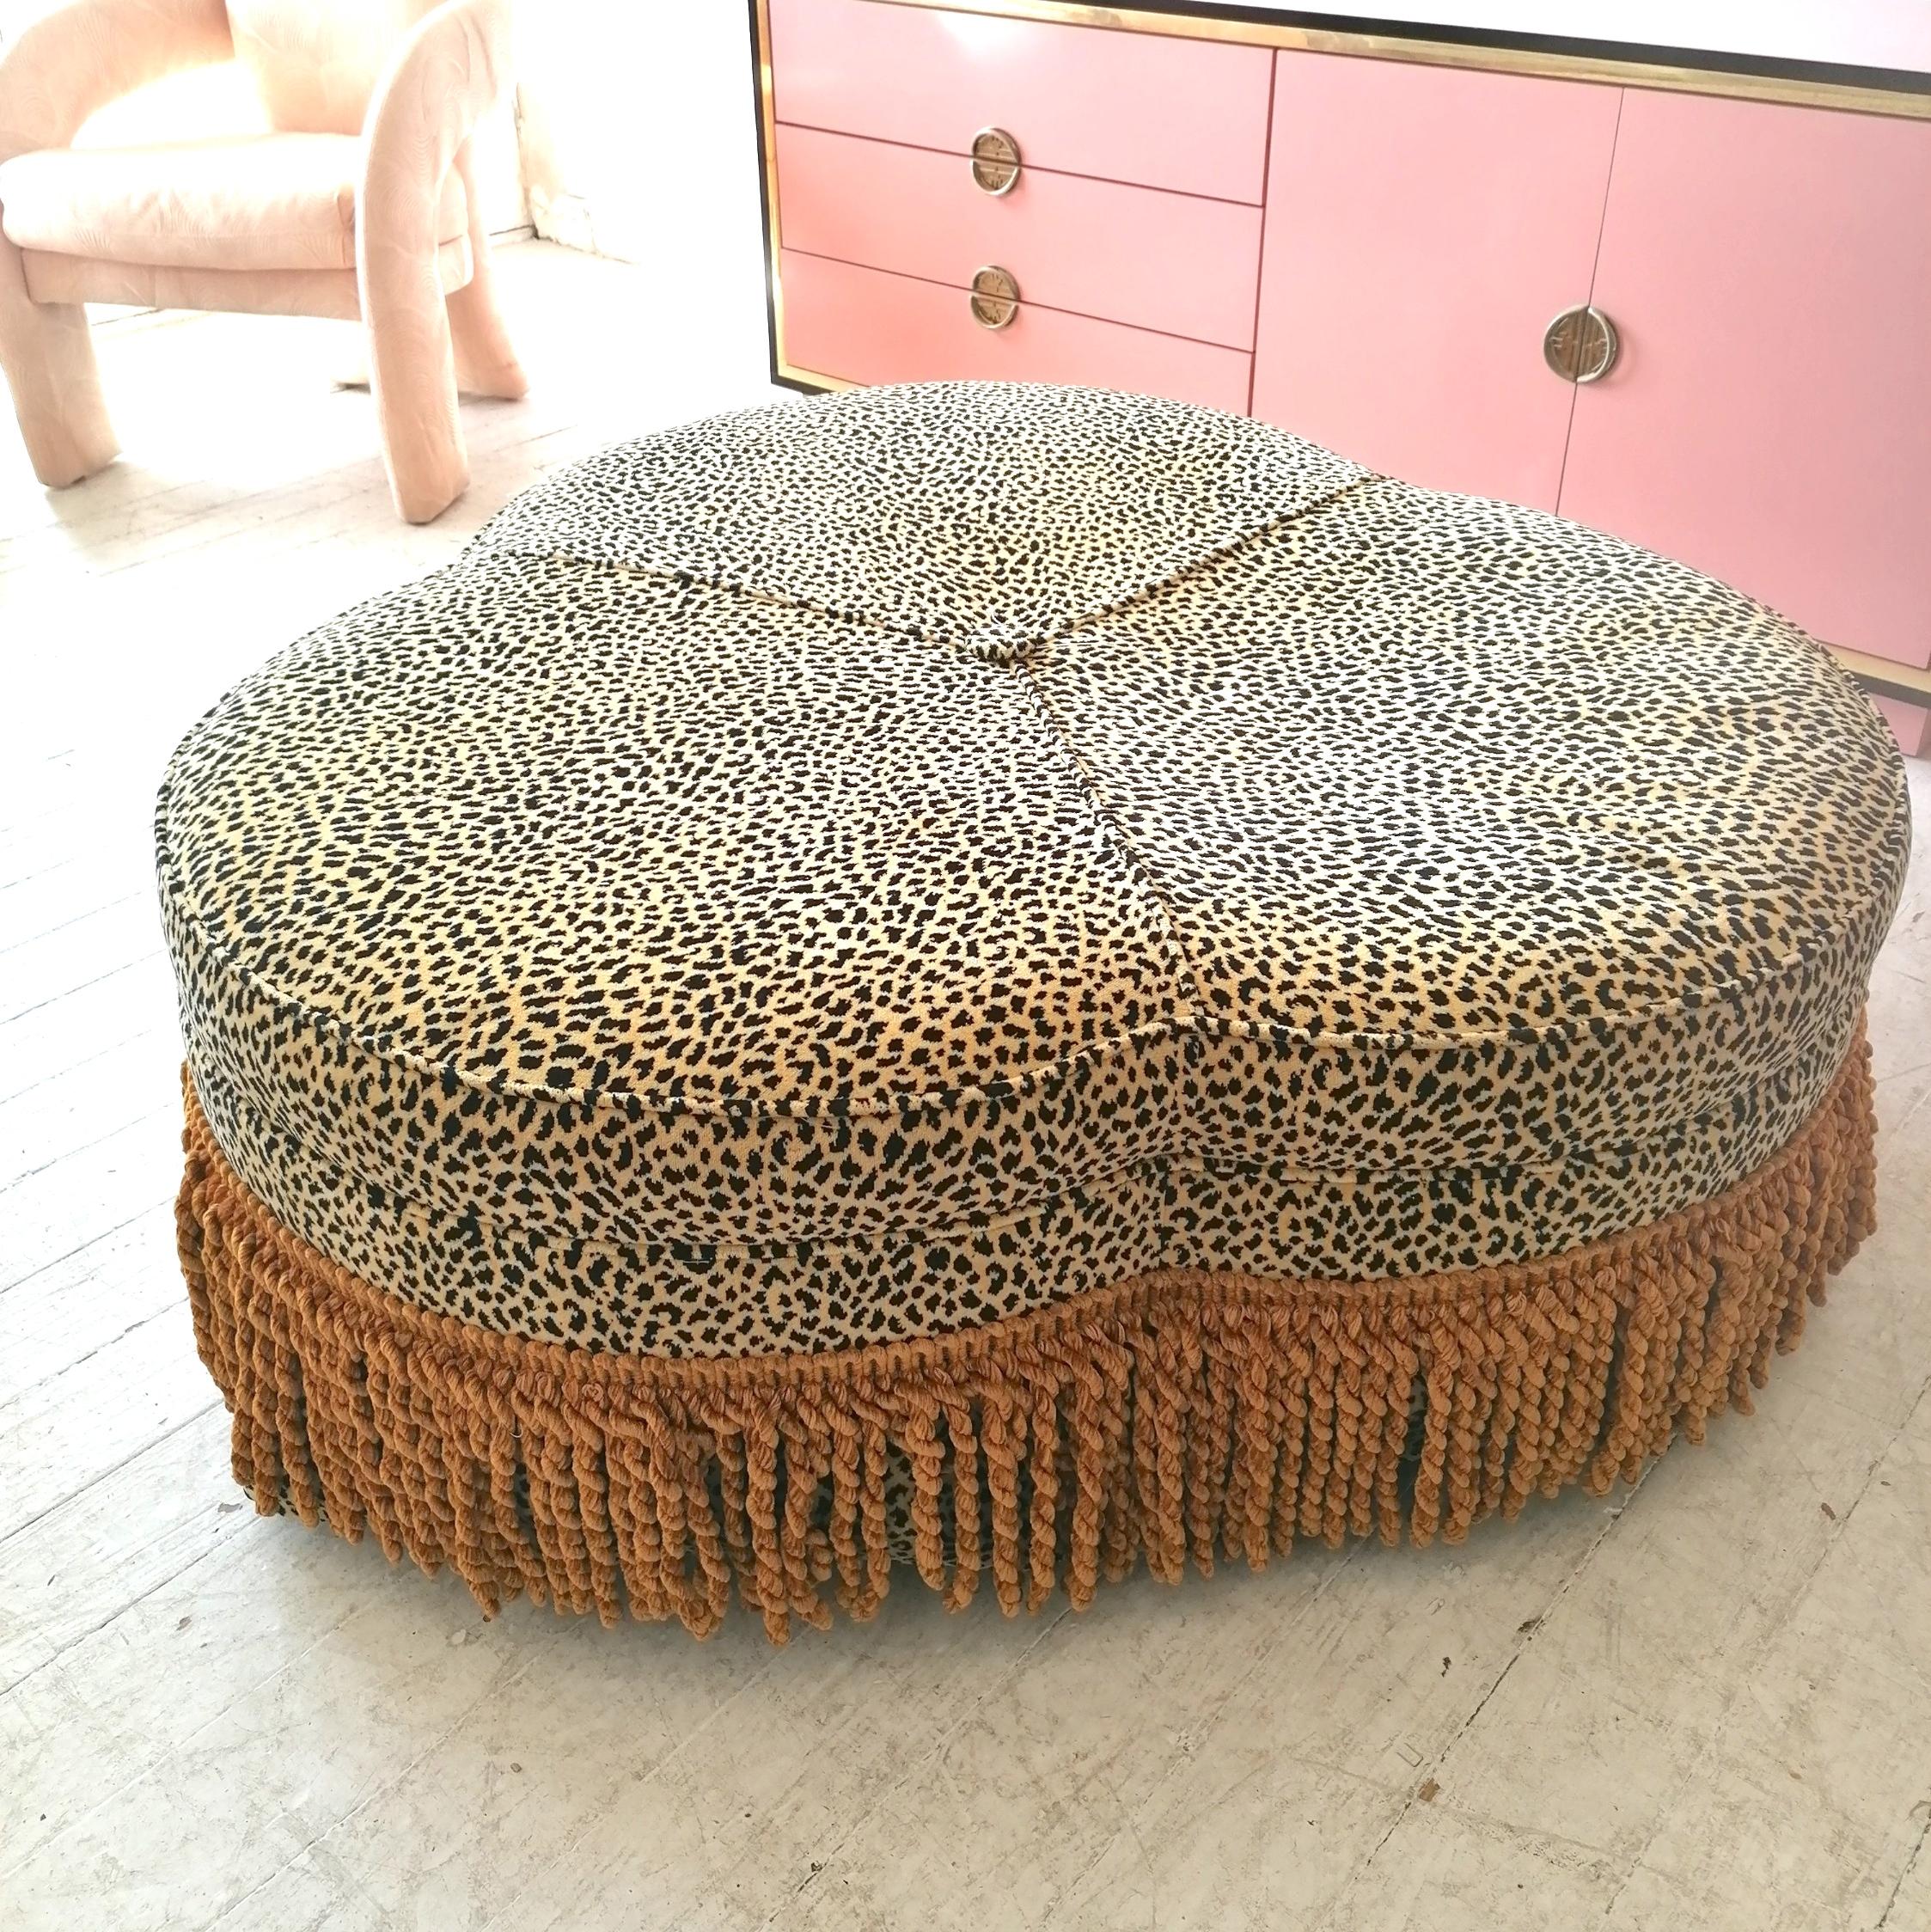 Gorgeous vintage American cloverleaf-shaped leopard pouffe / ottoman. The top part is sprung; stands on wooden legs (which are covered by a leopard kick pleat skirt) with brass ball Shepherd casters. Upholstered in its original thick, luxurious